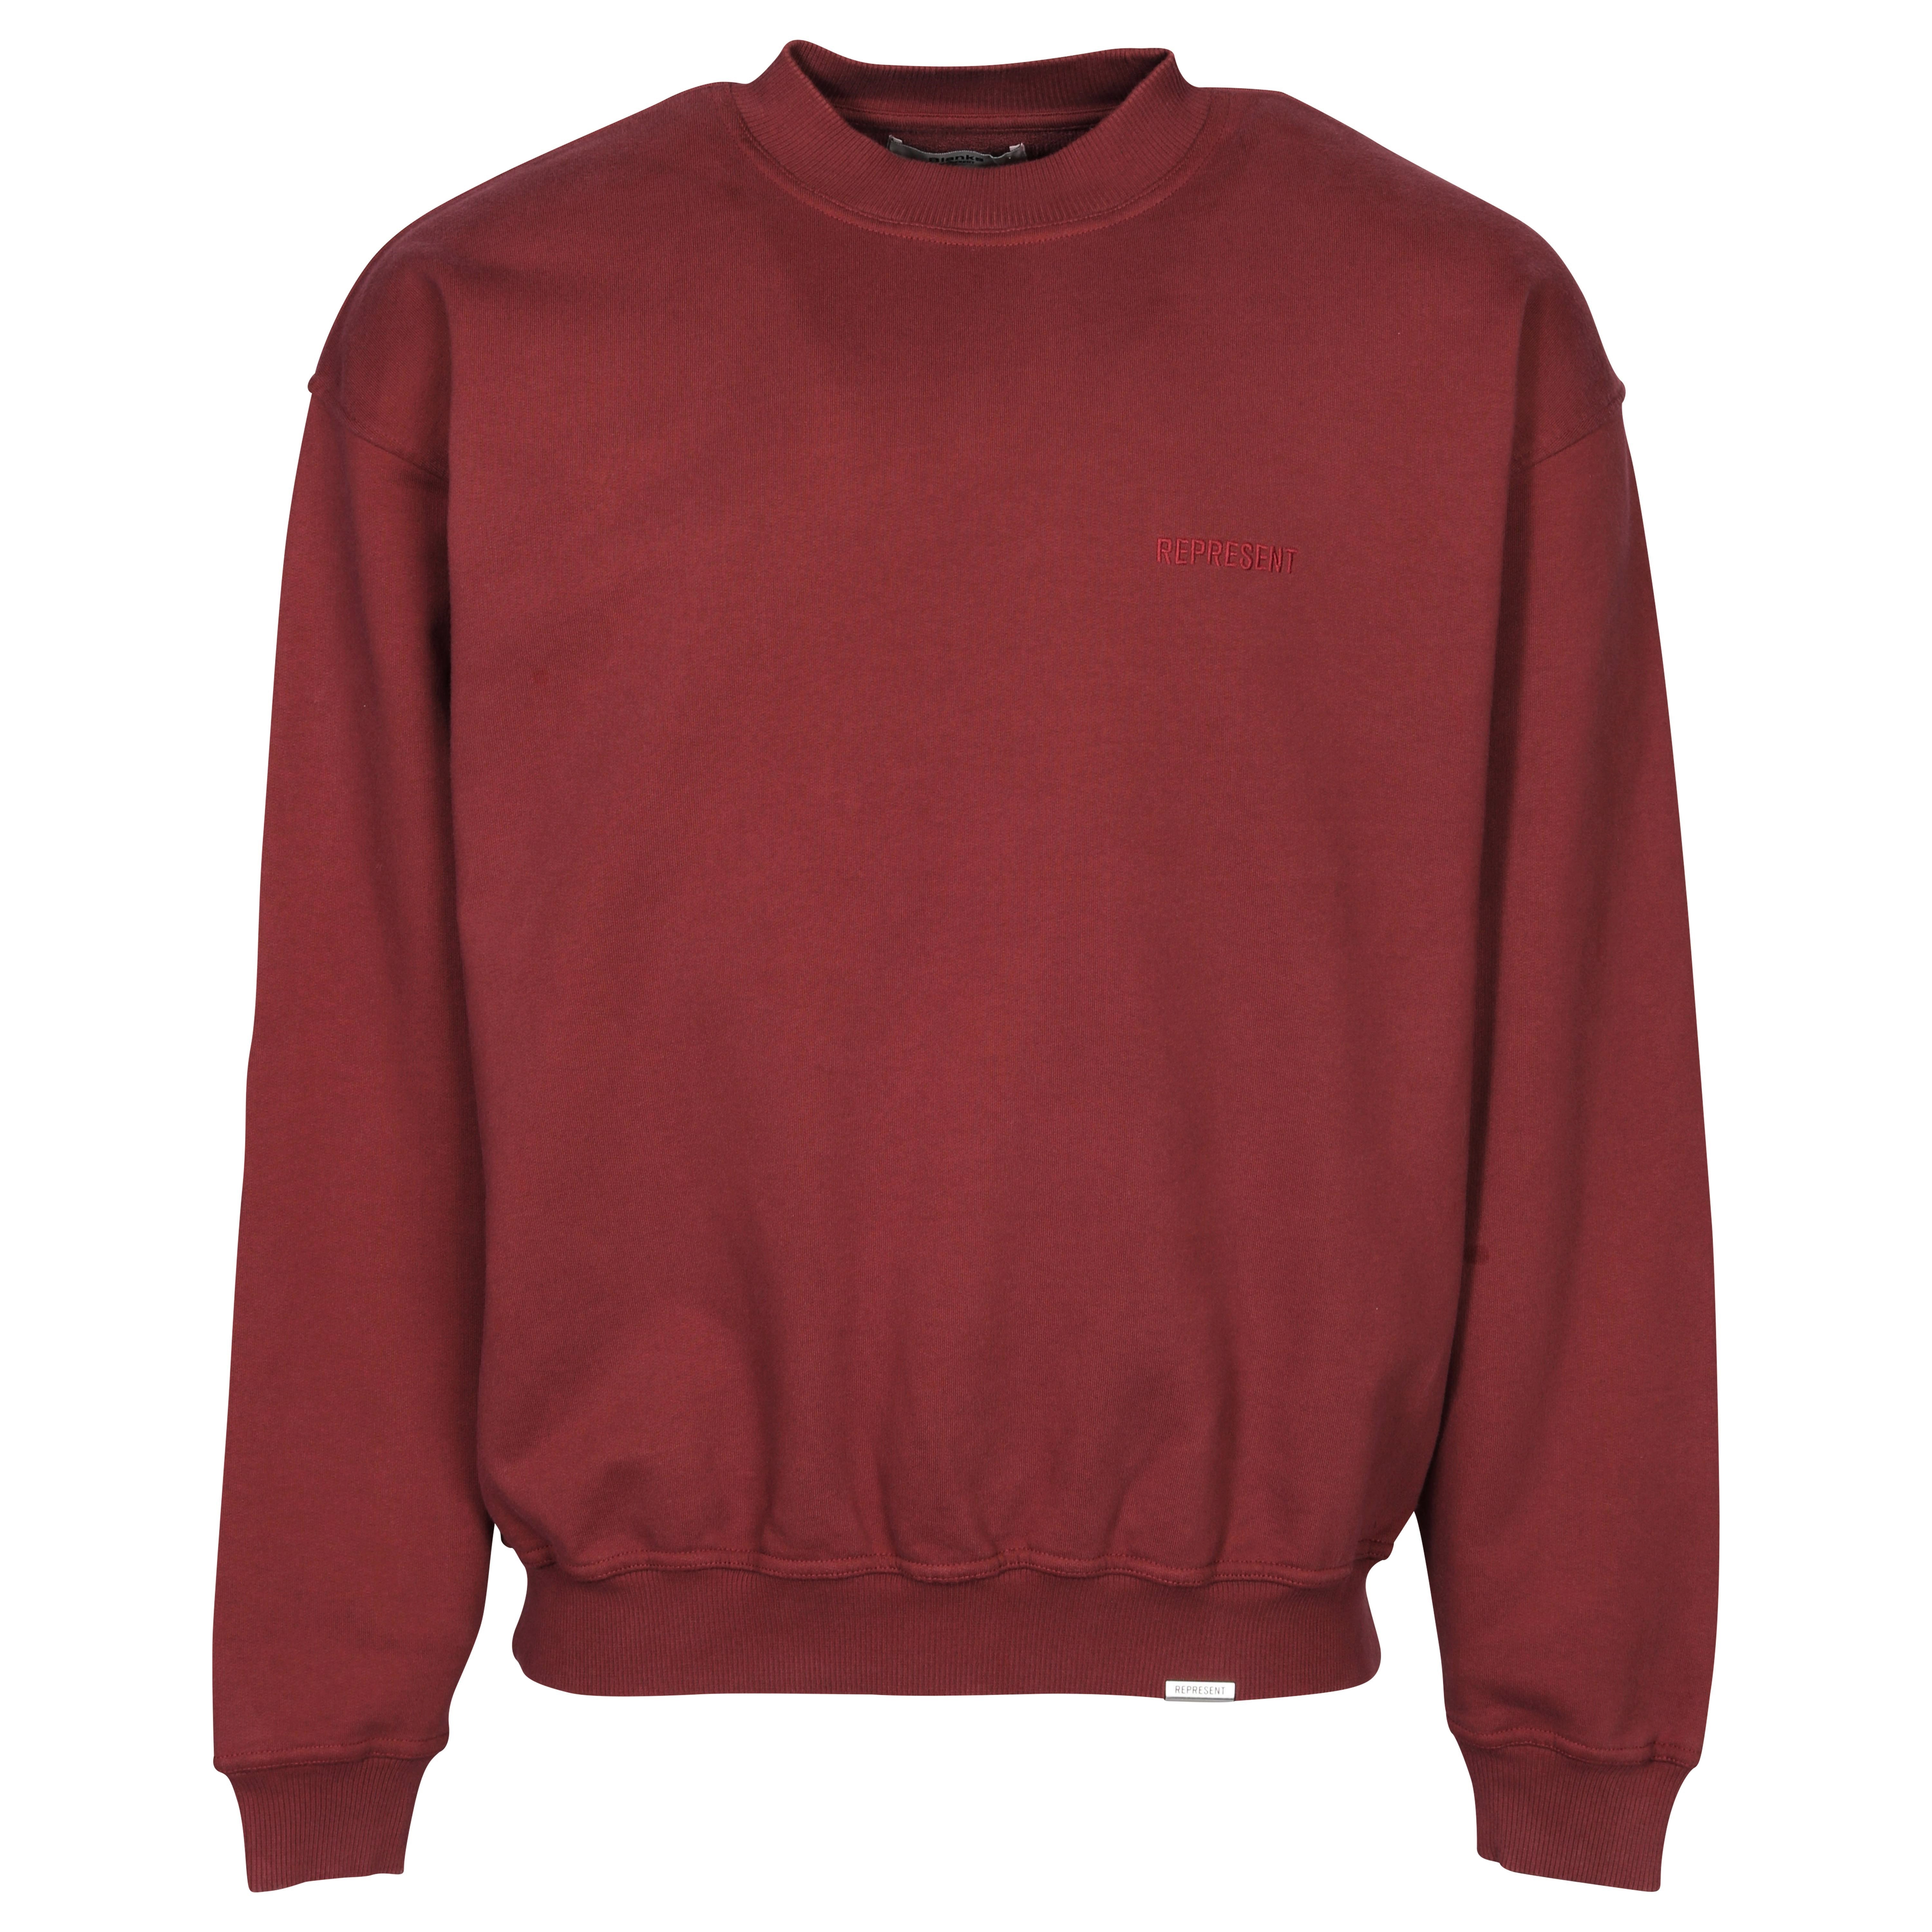 Represent Blank Sweater in Vintage Red